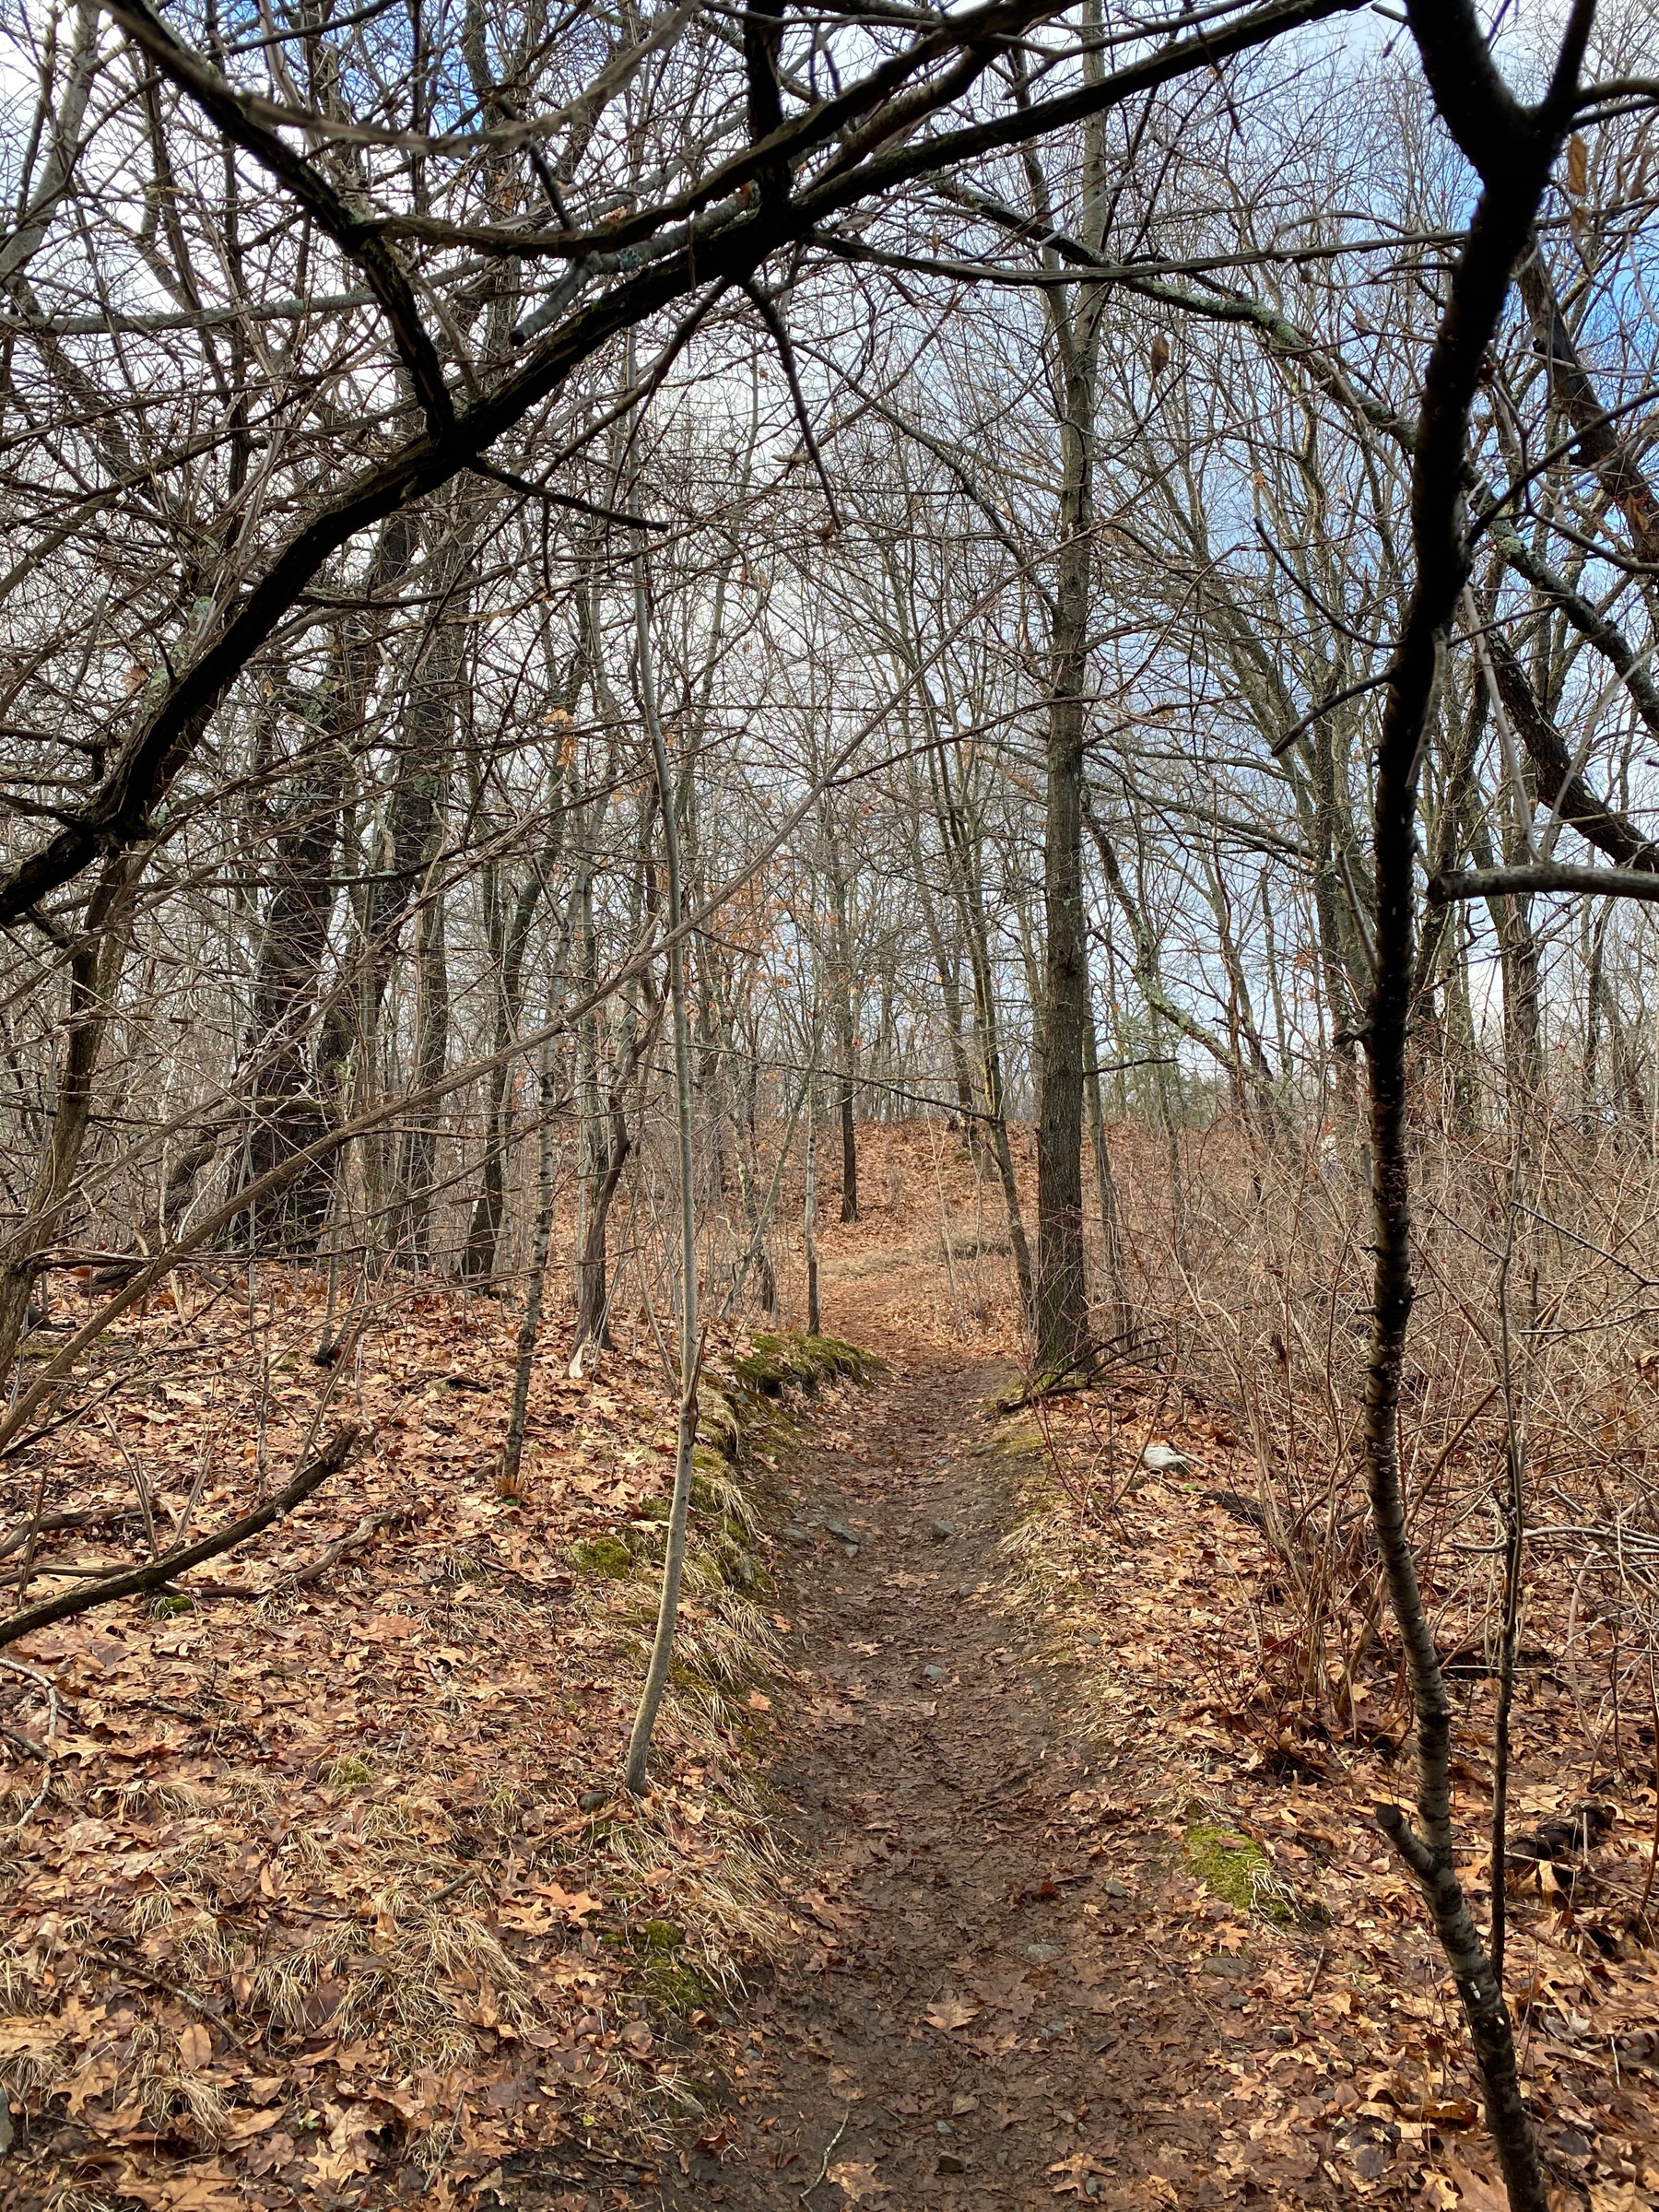 View of a path surrounded by leafless tree trunks and brown leaves littering the ground.